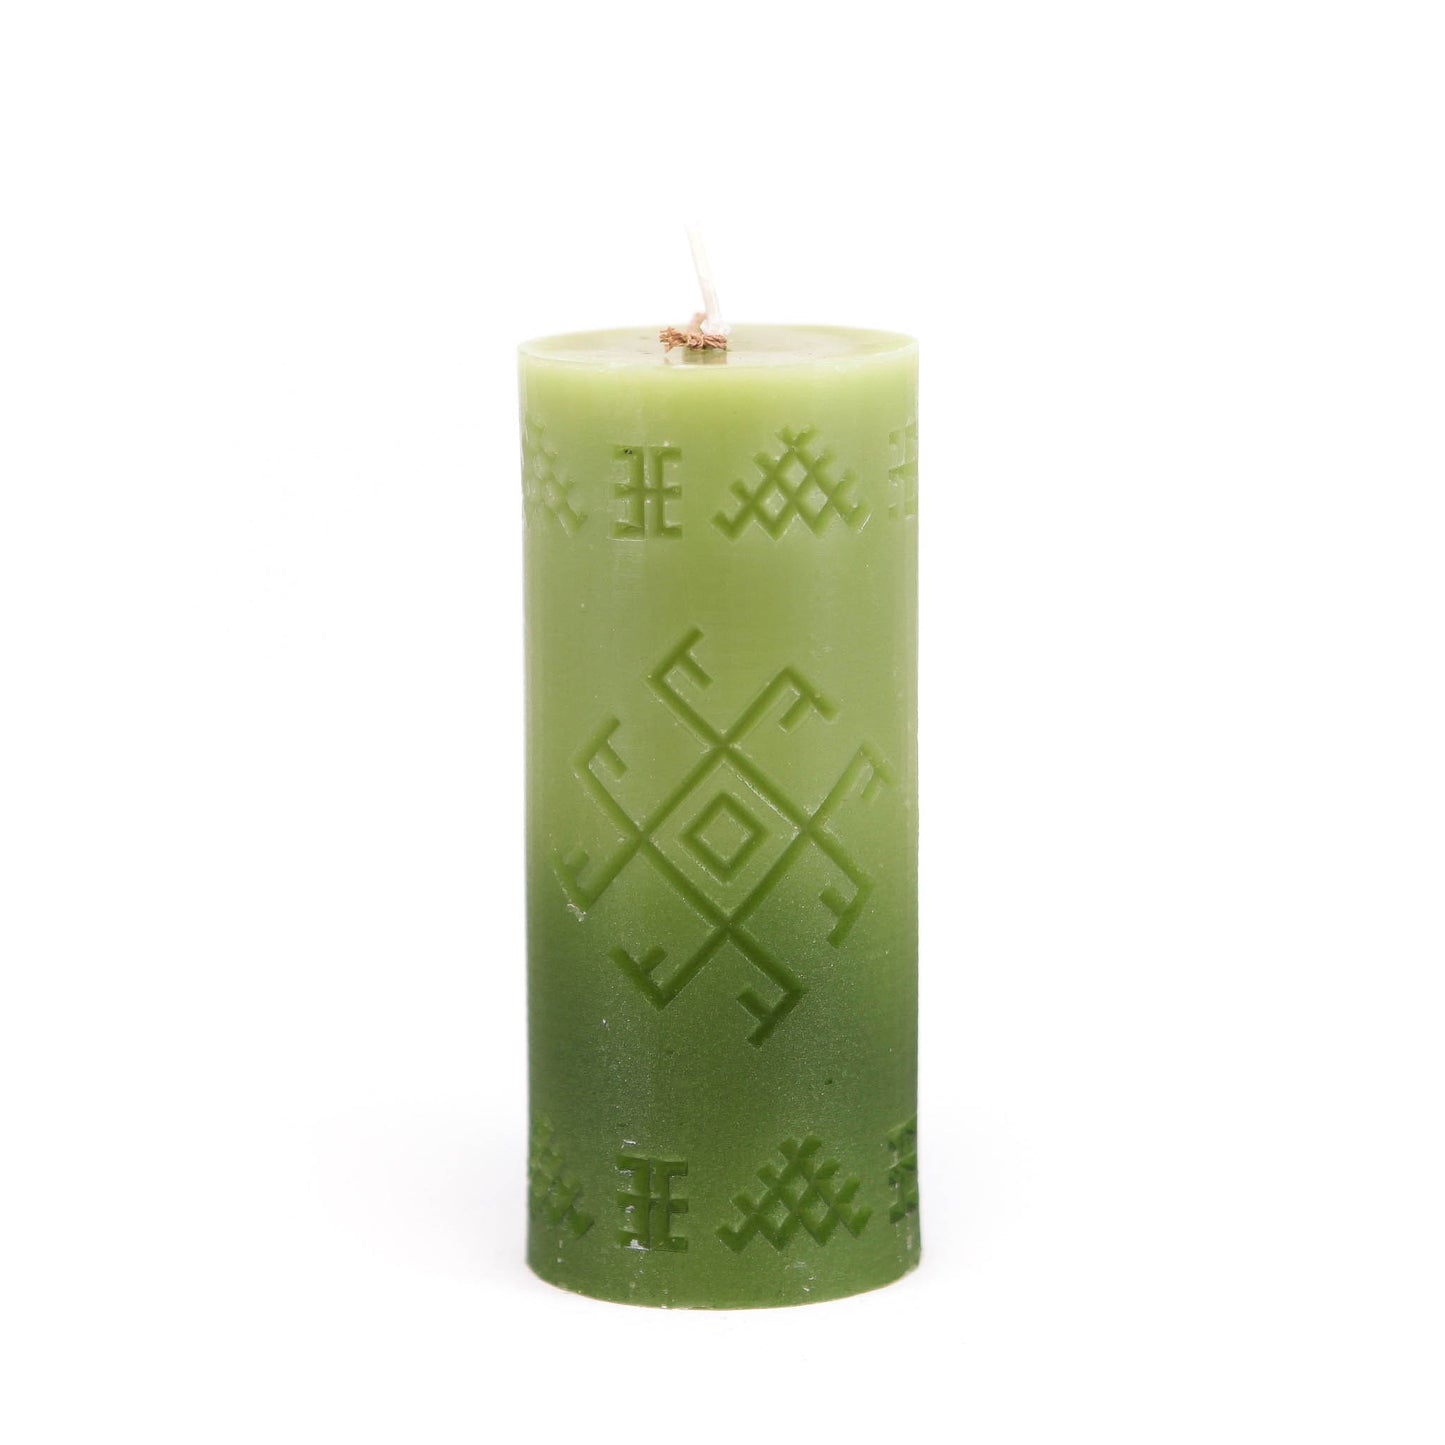 Candle with Latvian rune "Fire cross", green